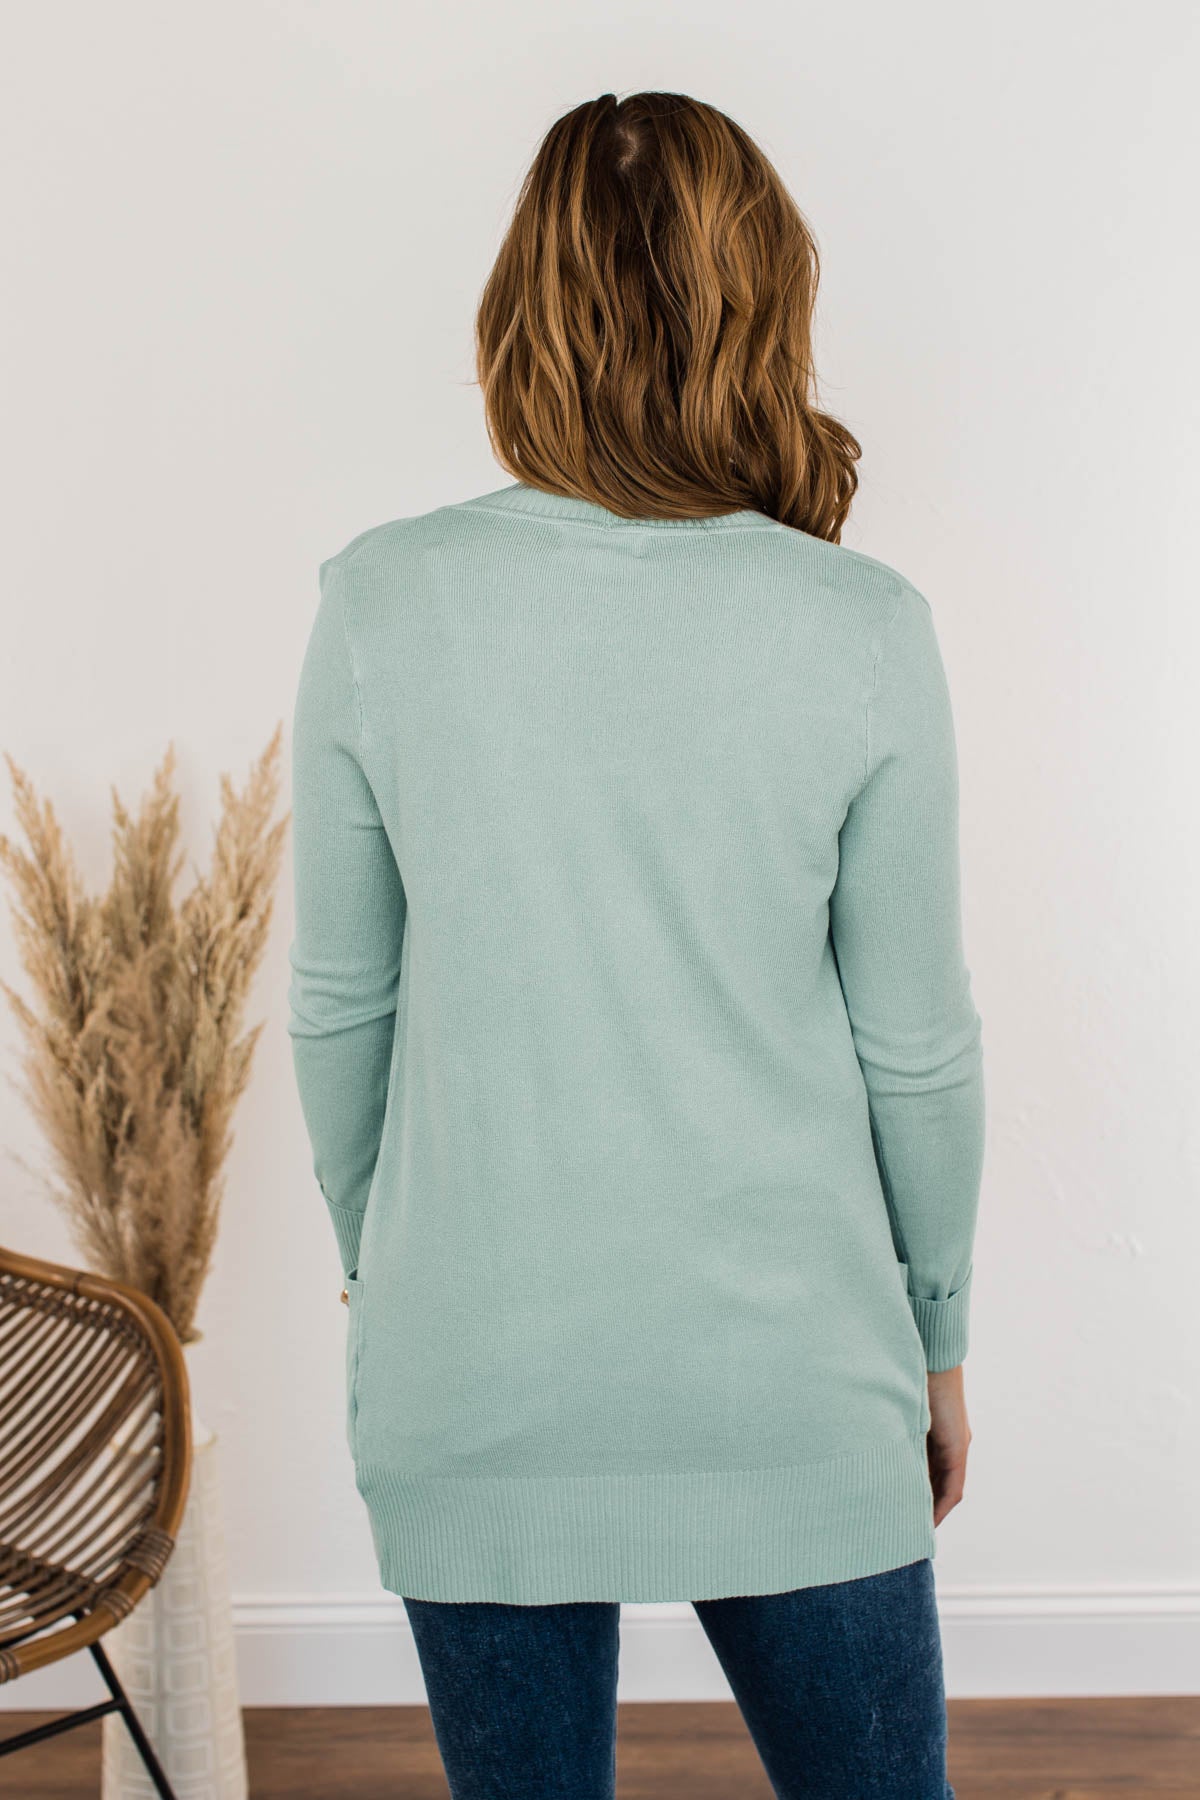 Comfortable With Myself Knit Cardigan- Mint